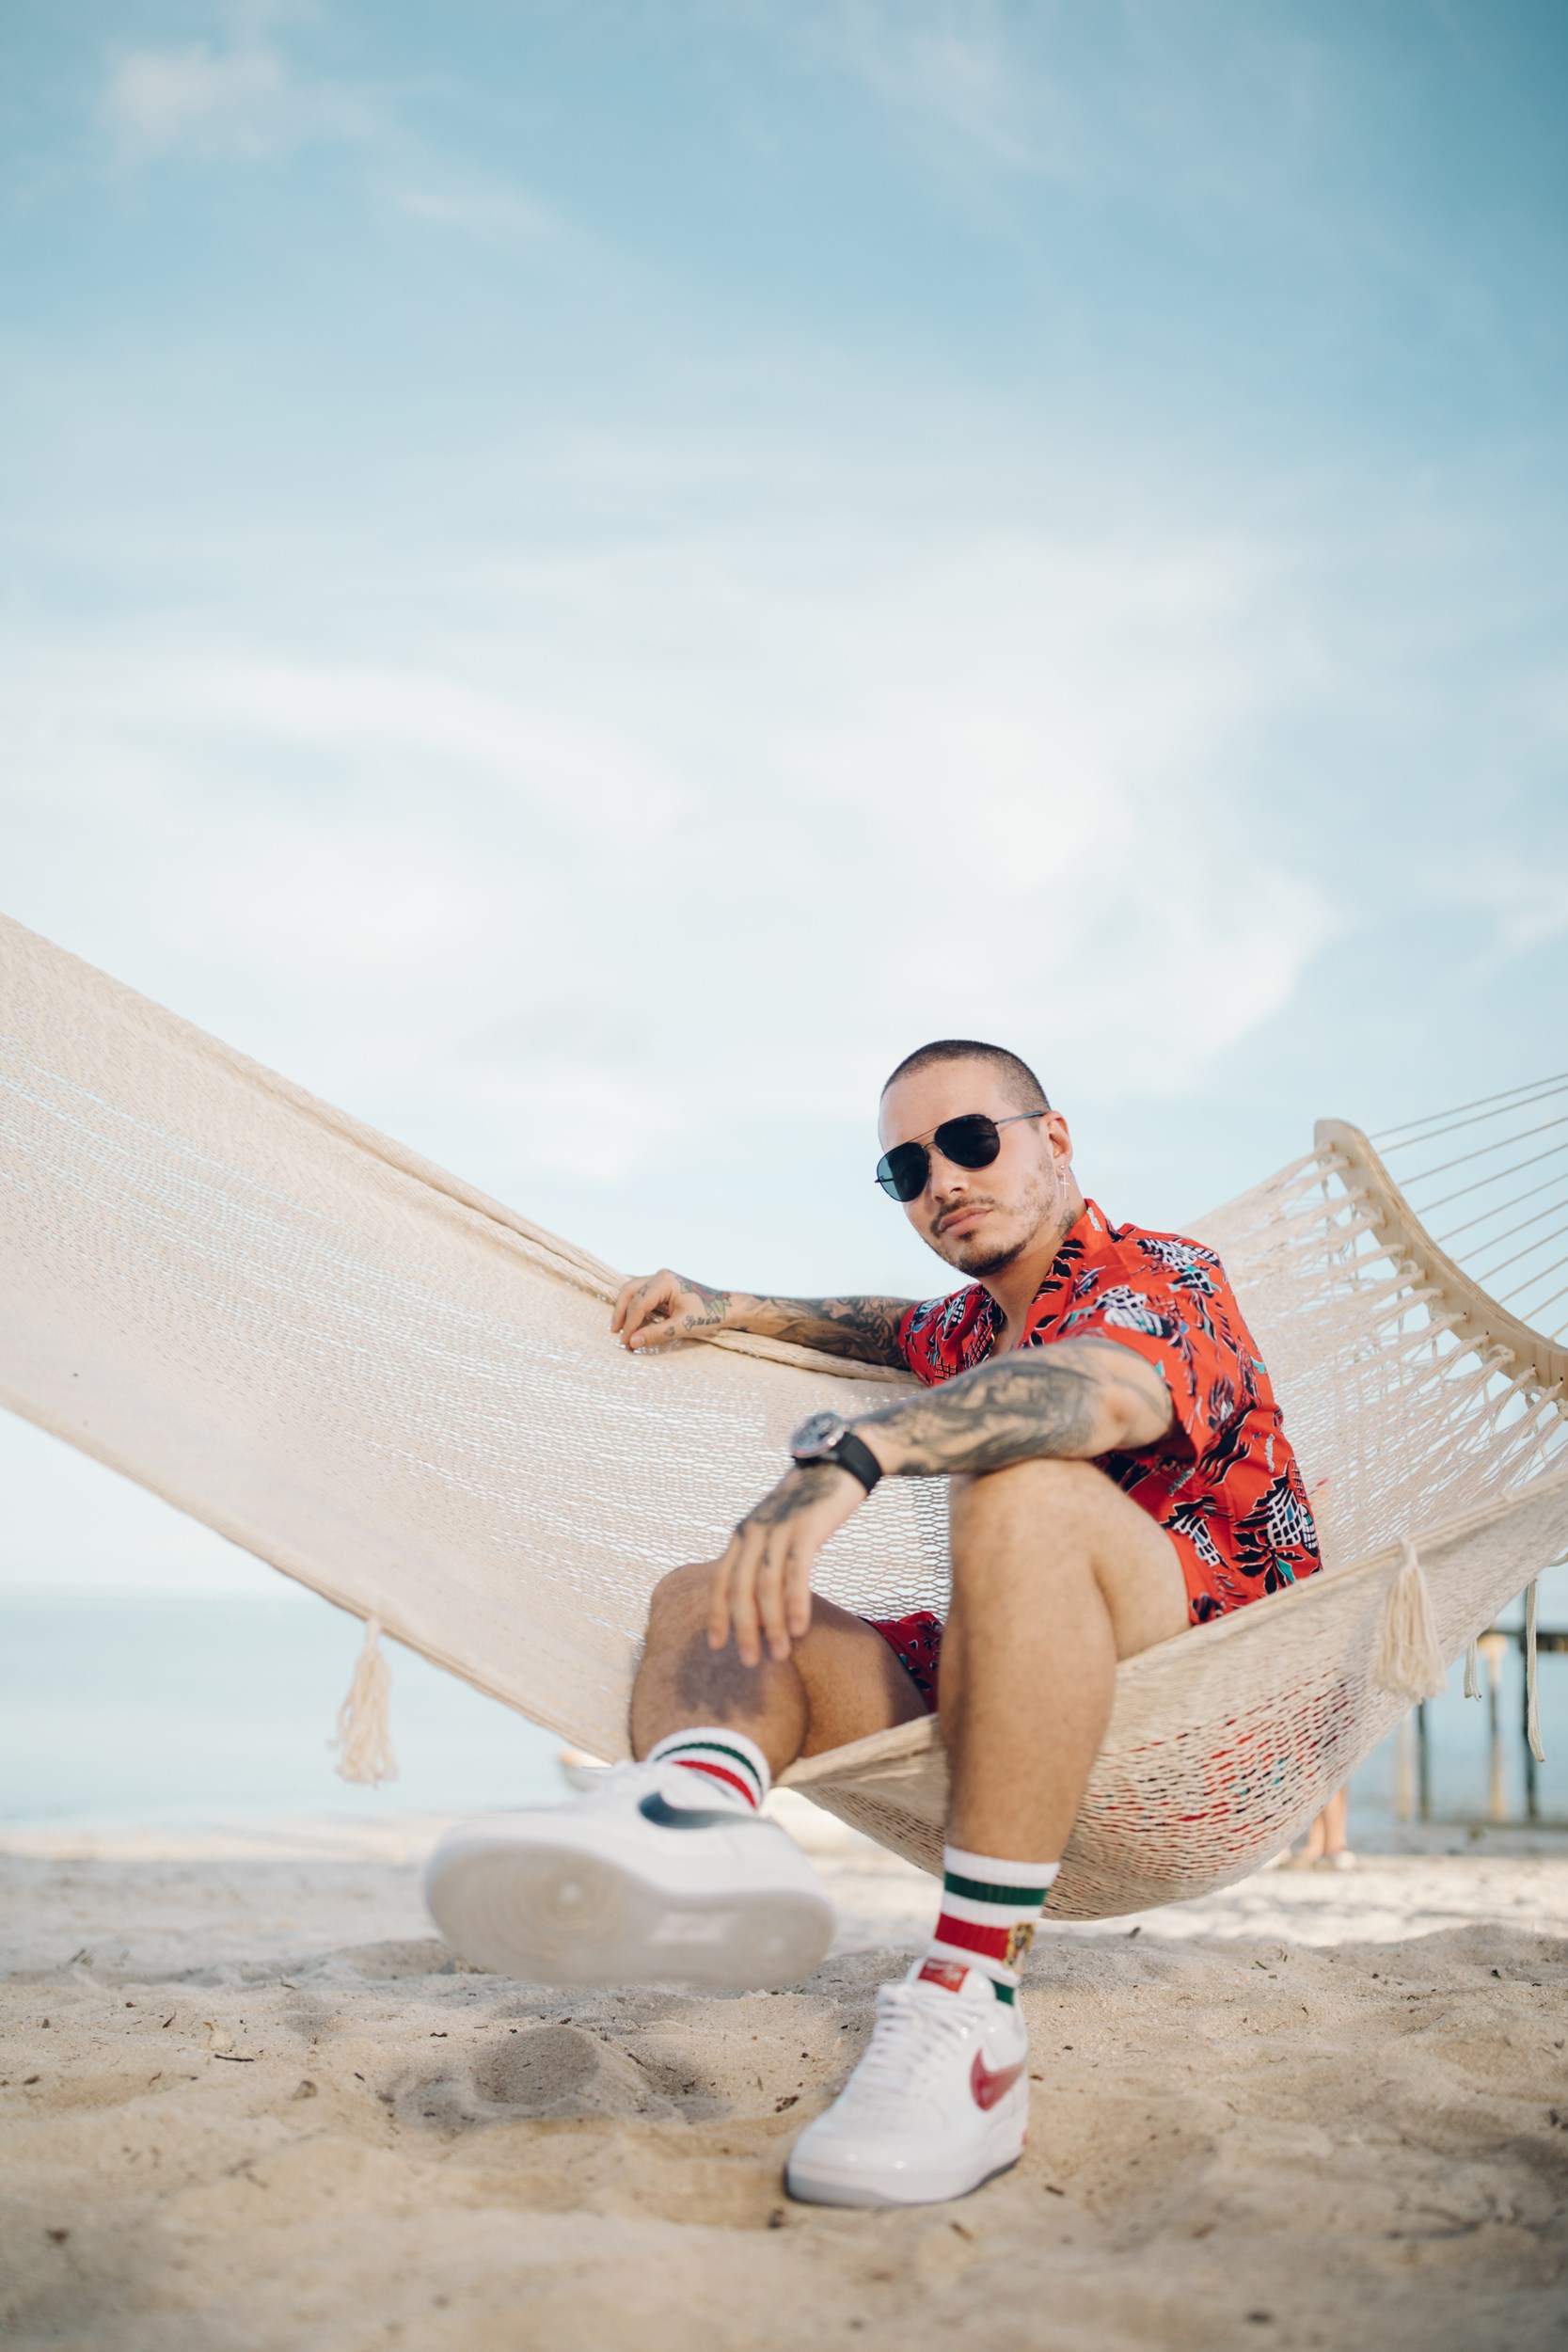 J Balvin: latest news and pictures - HOLA! USA